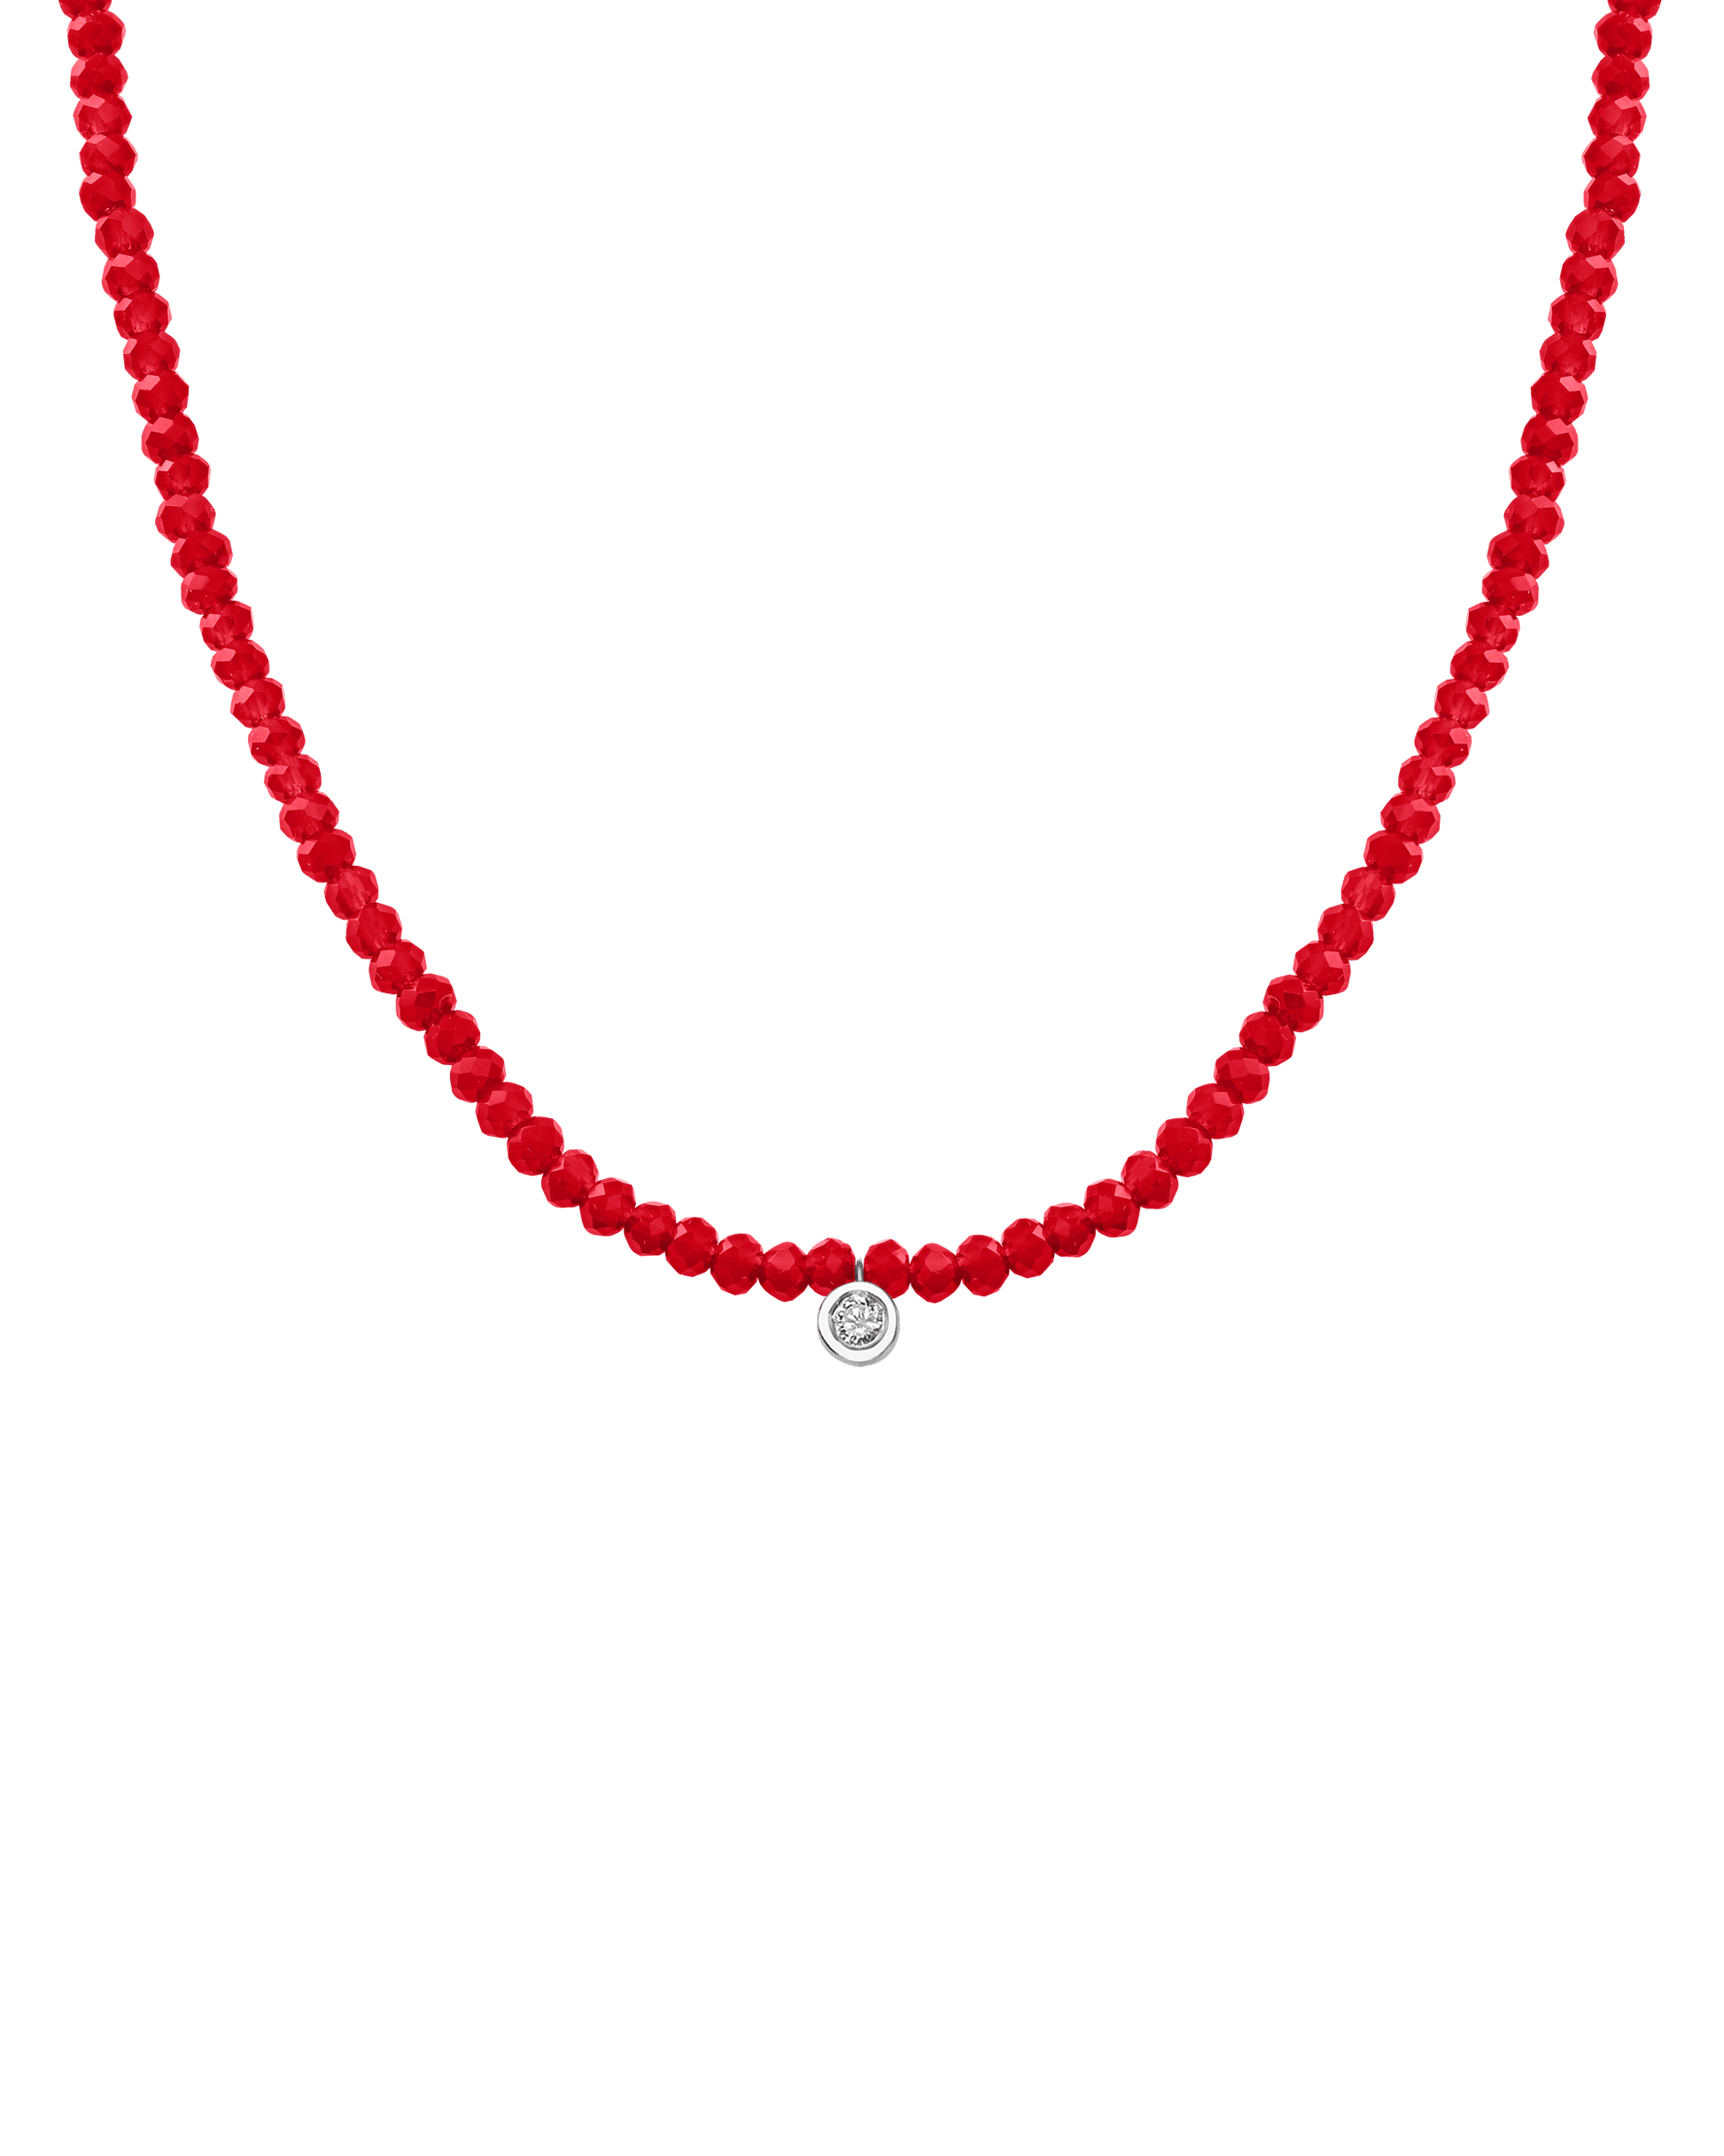 The Gemstone & Diamond Necklace - 14K White Gold Necklaces 14K Solid Gold Natural Red Jade Medium: 0.04ct 14"